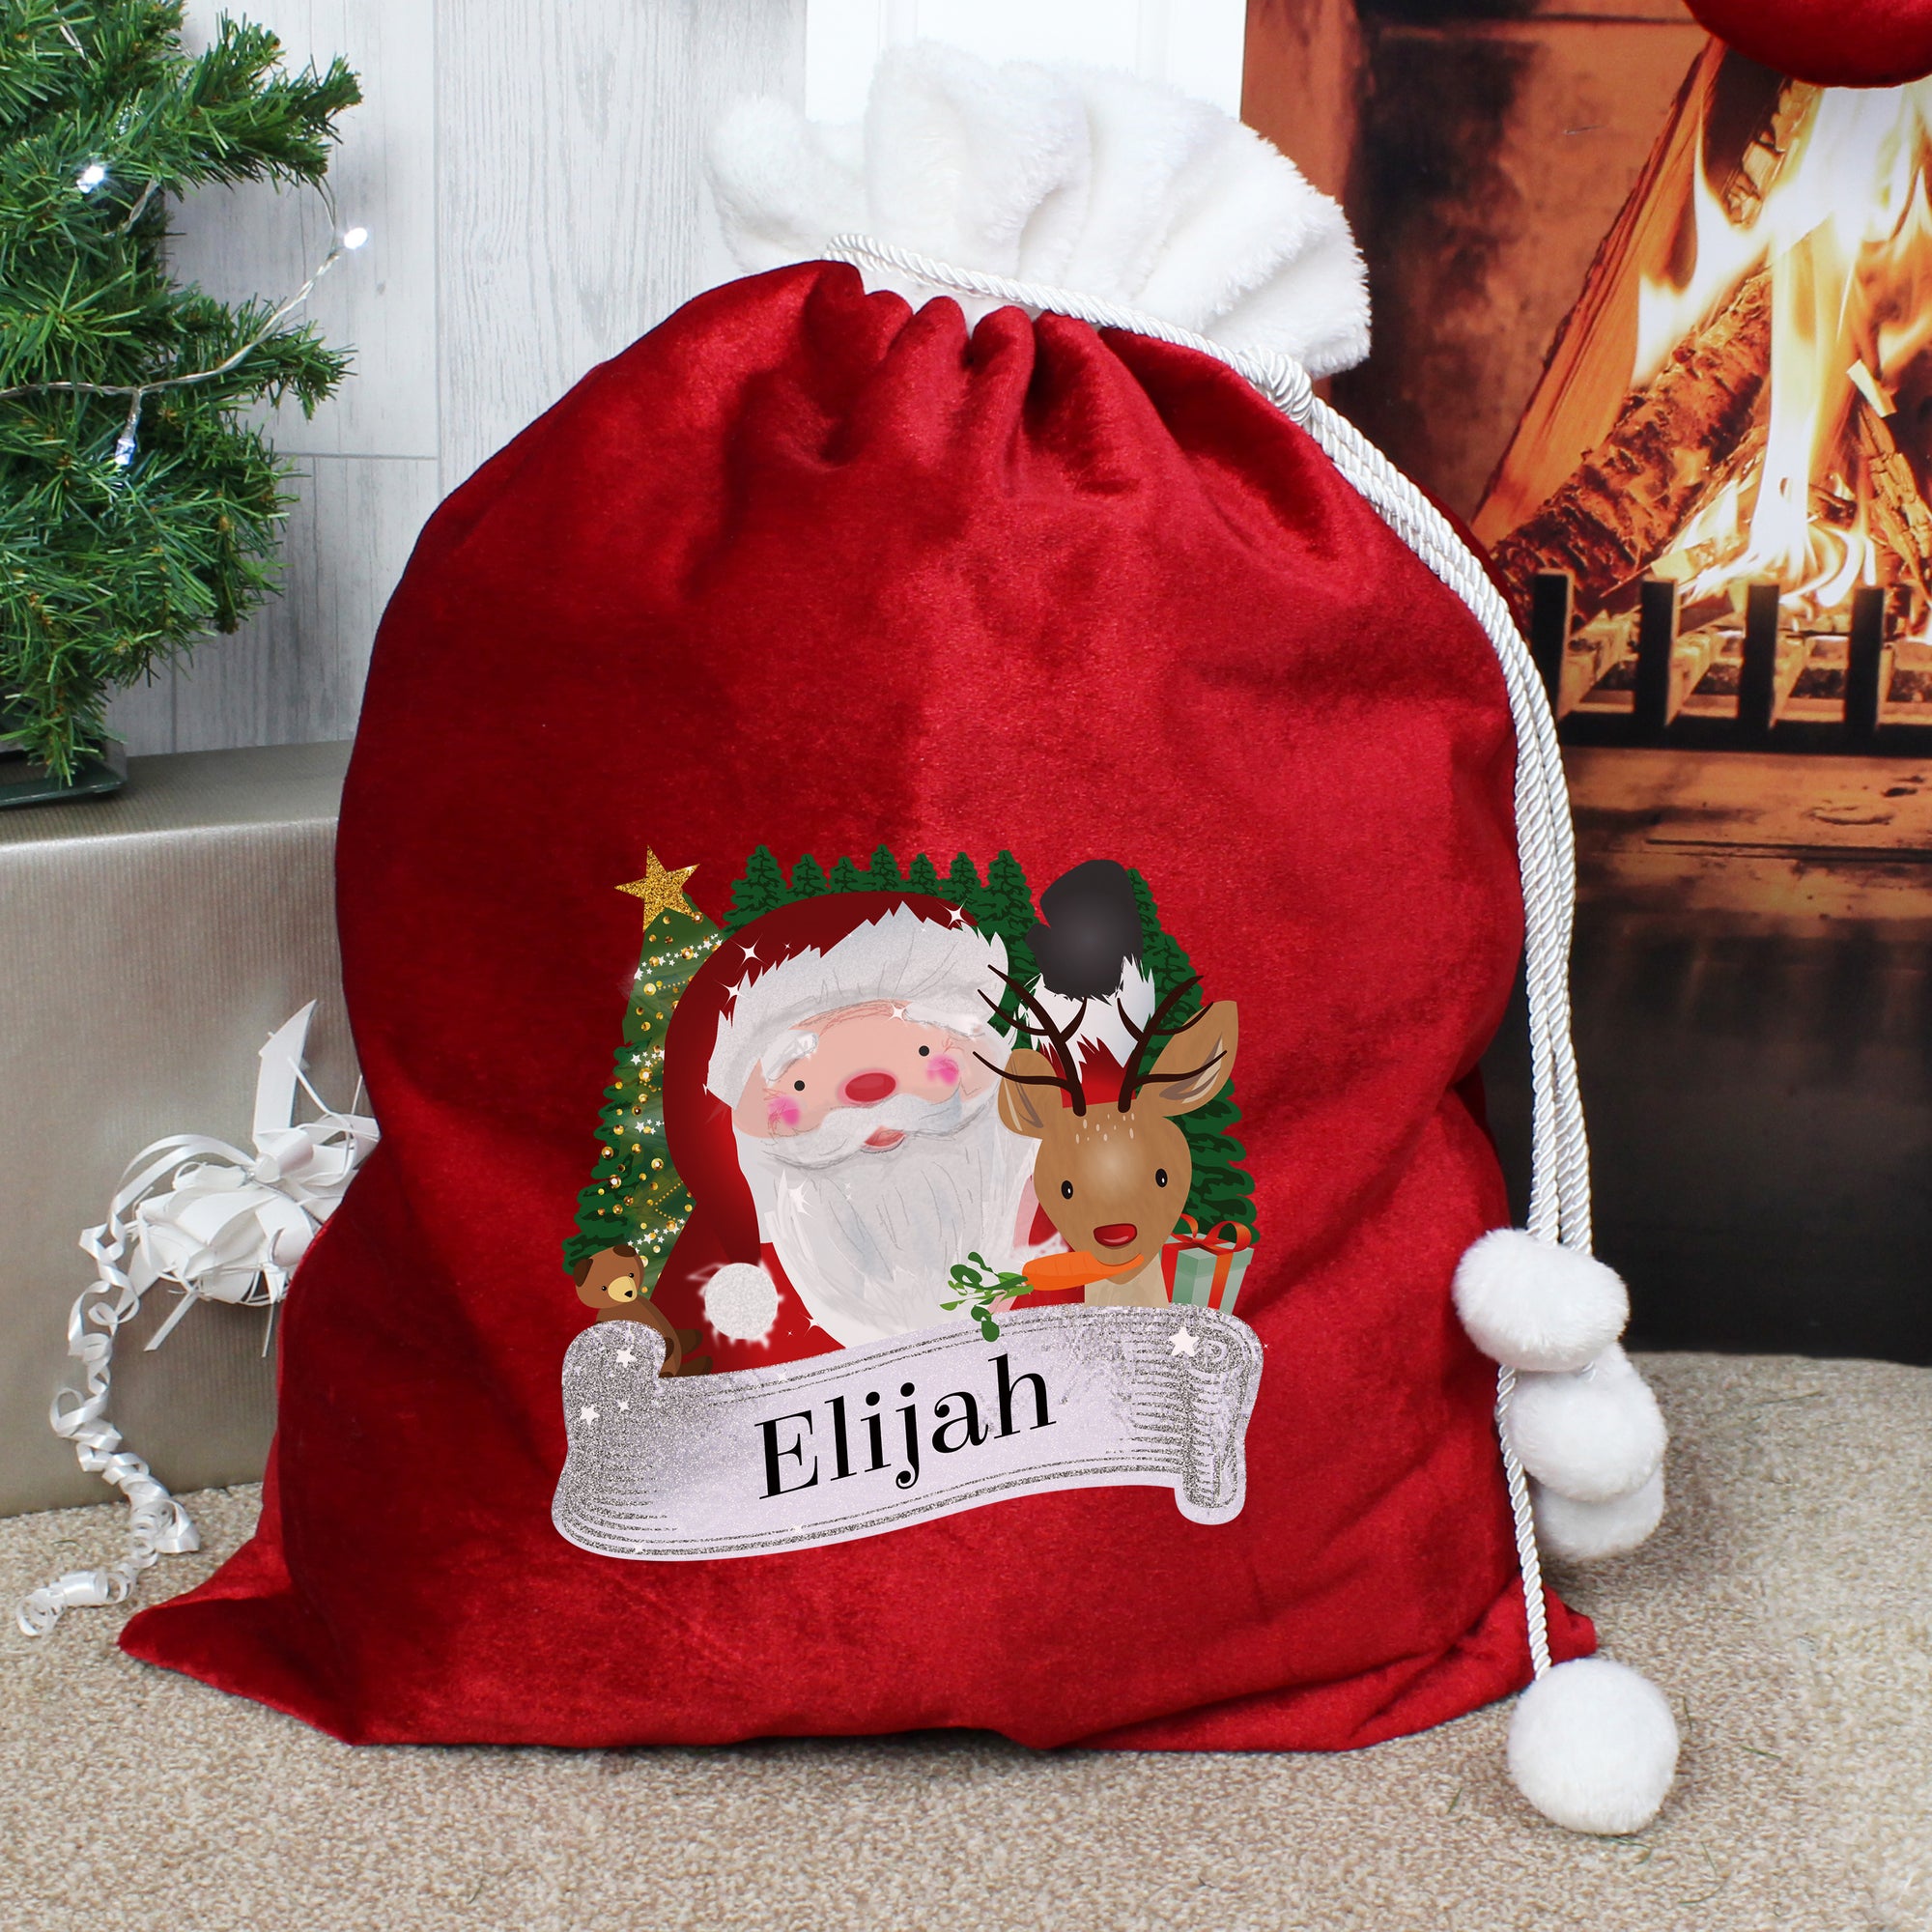 Personalised soft red velvet Christmas present sack featuring a cartoon illustration of Santa and the wording Merry Christmas. There is a white fur cuff on the top of the sack. The front of the sack can be personalised with a name of your choice of up to 12 characters which will be printed just below the illustration of Santa in a black font.